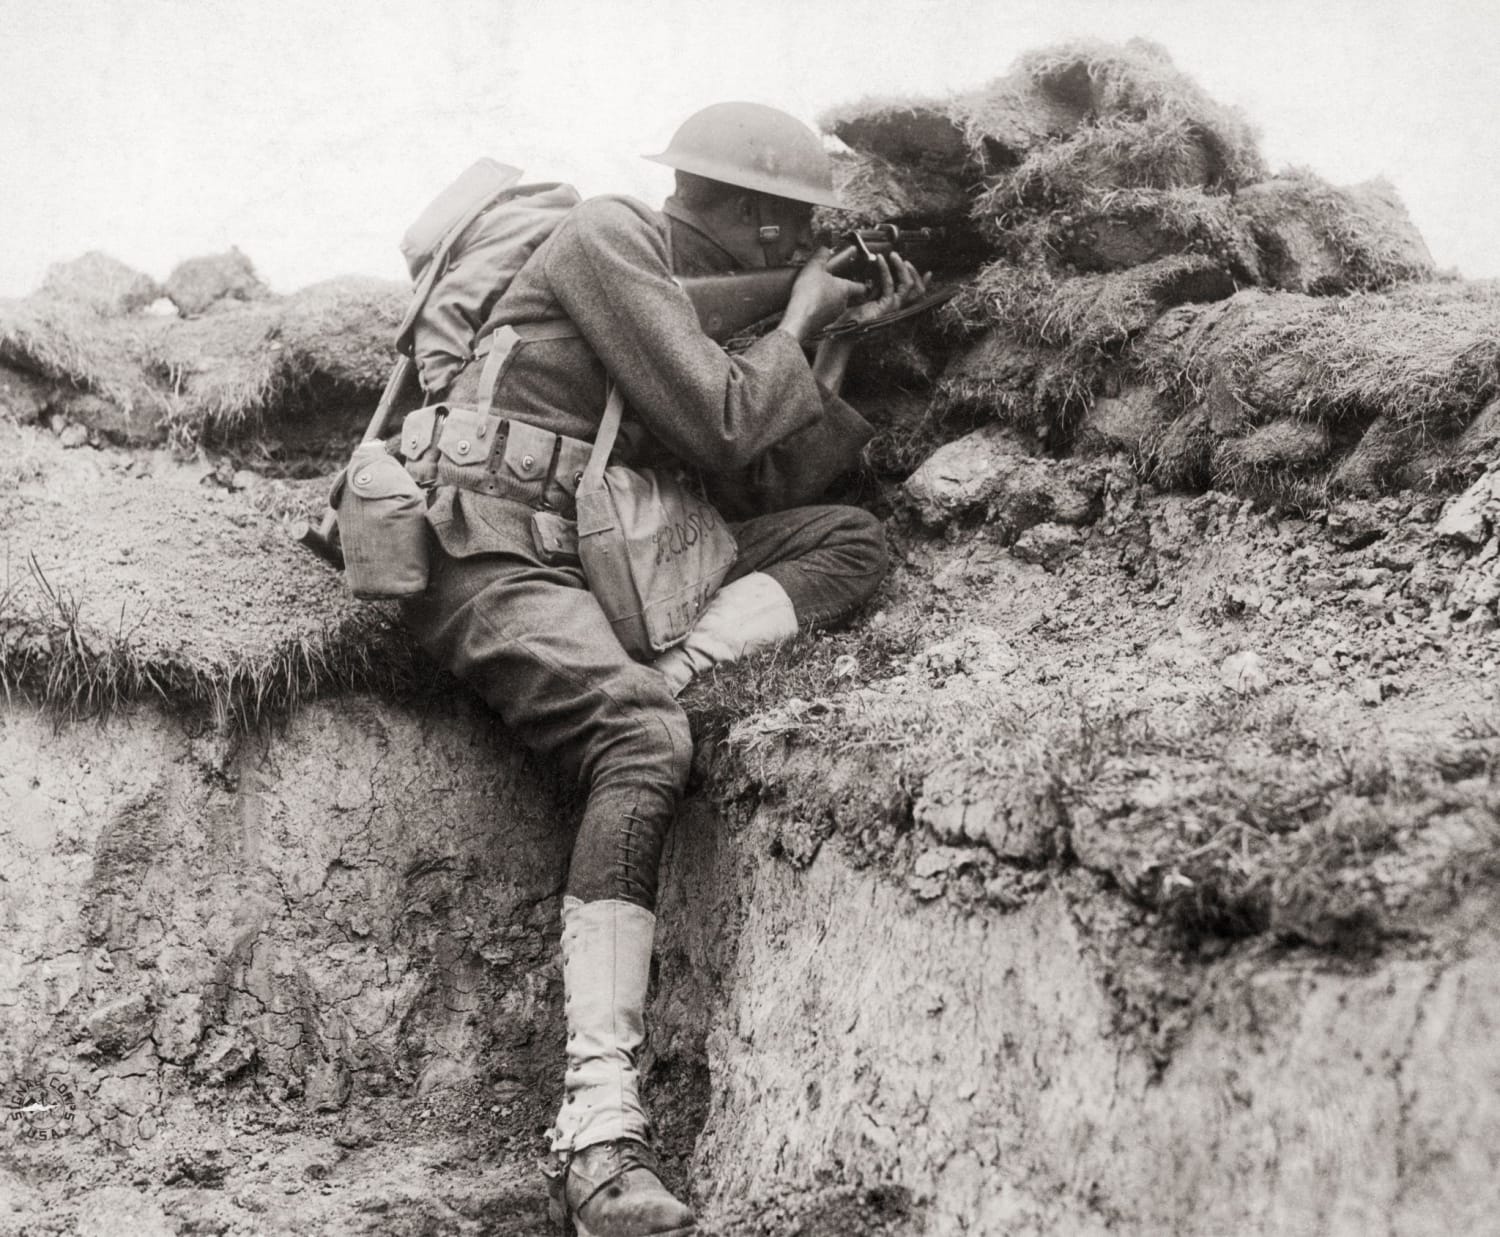 American sniper from the 30th Infantry Division searching for targets from a trench in Belgium. July 9, 1918.